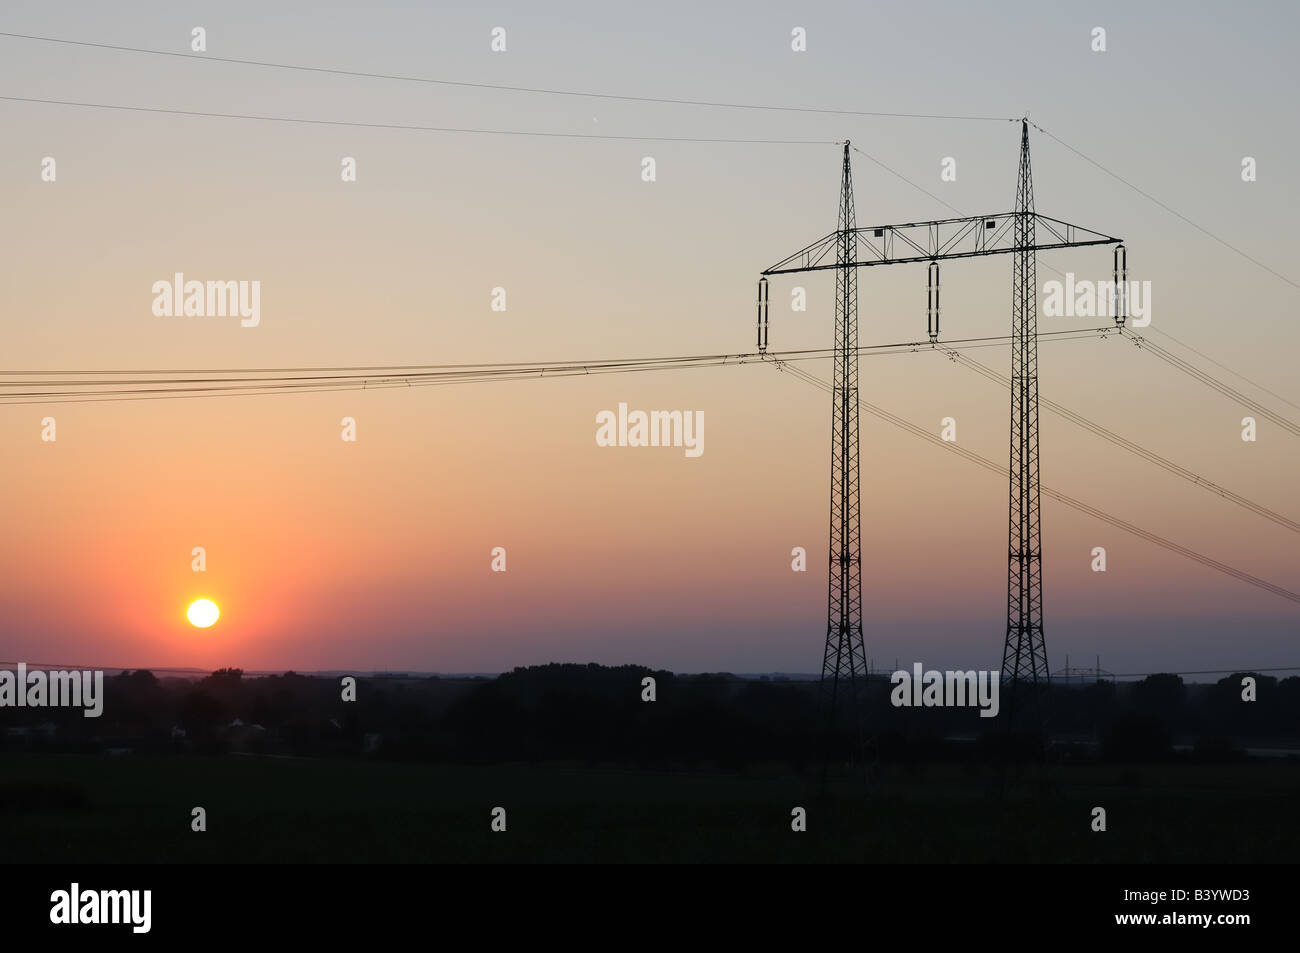 High voltage electricity pylons on a field at sunset. Stock Photo